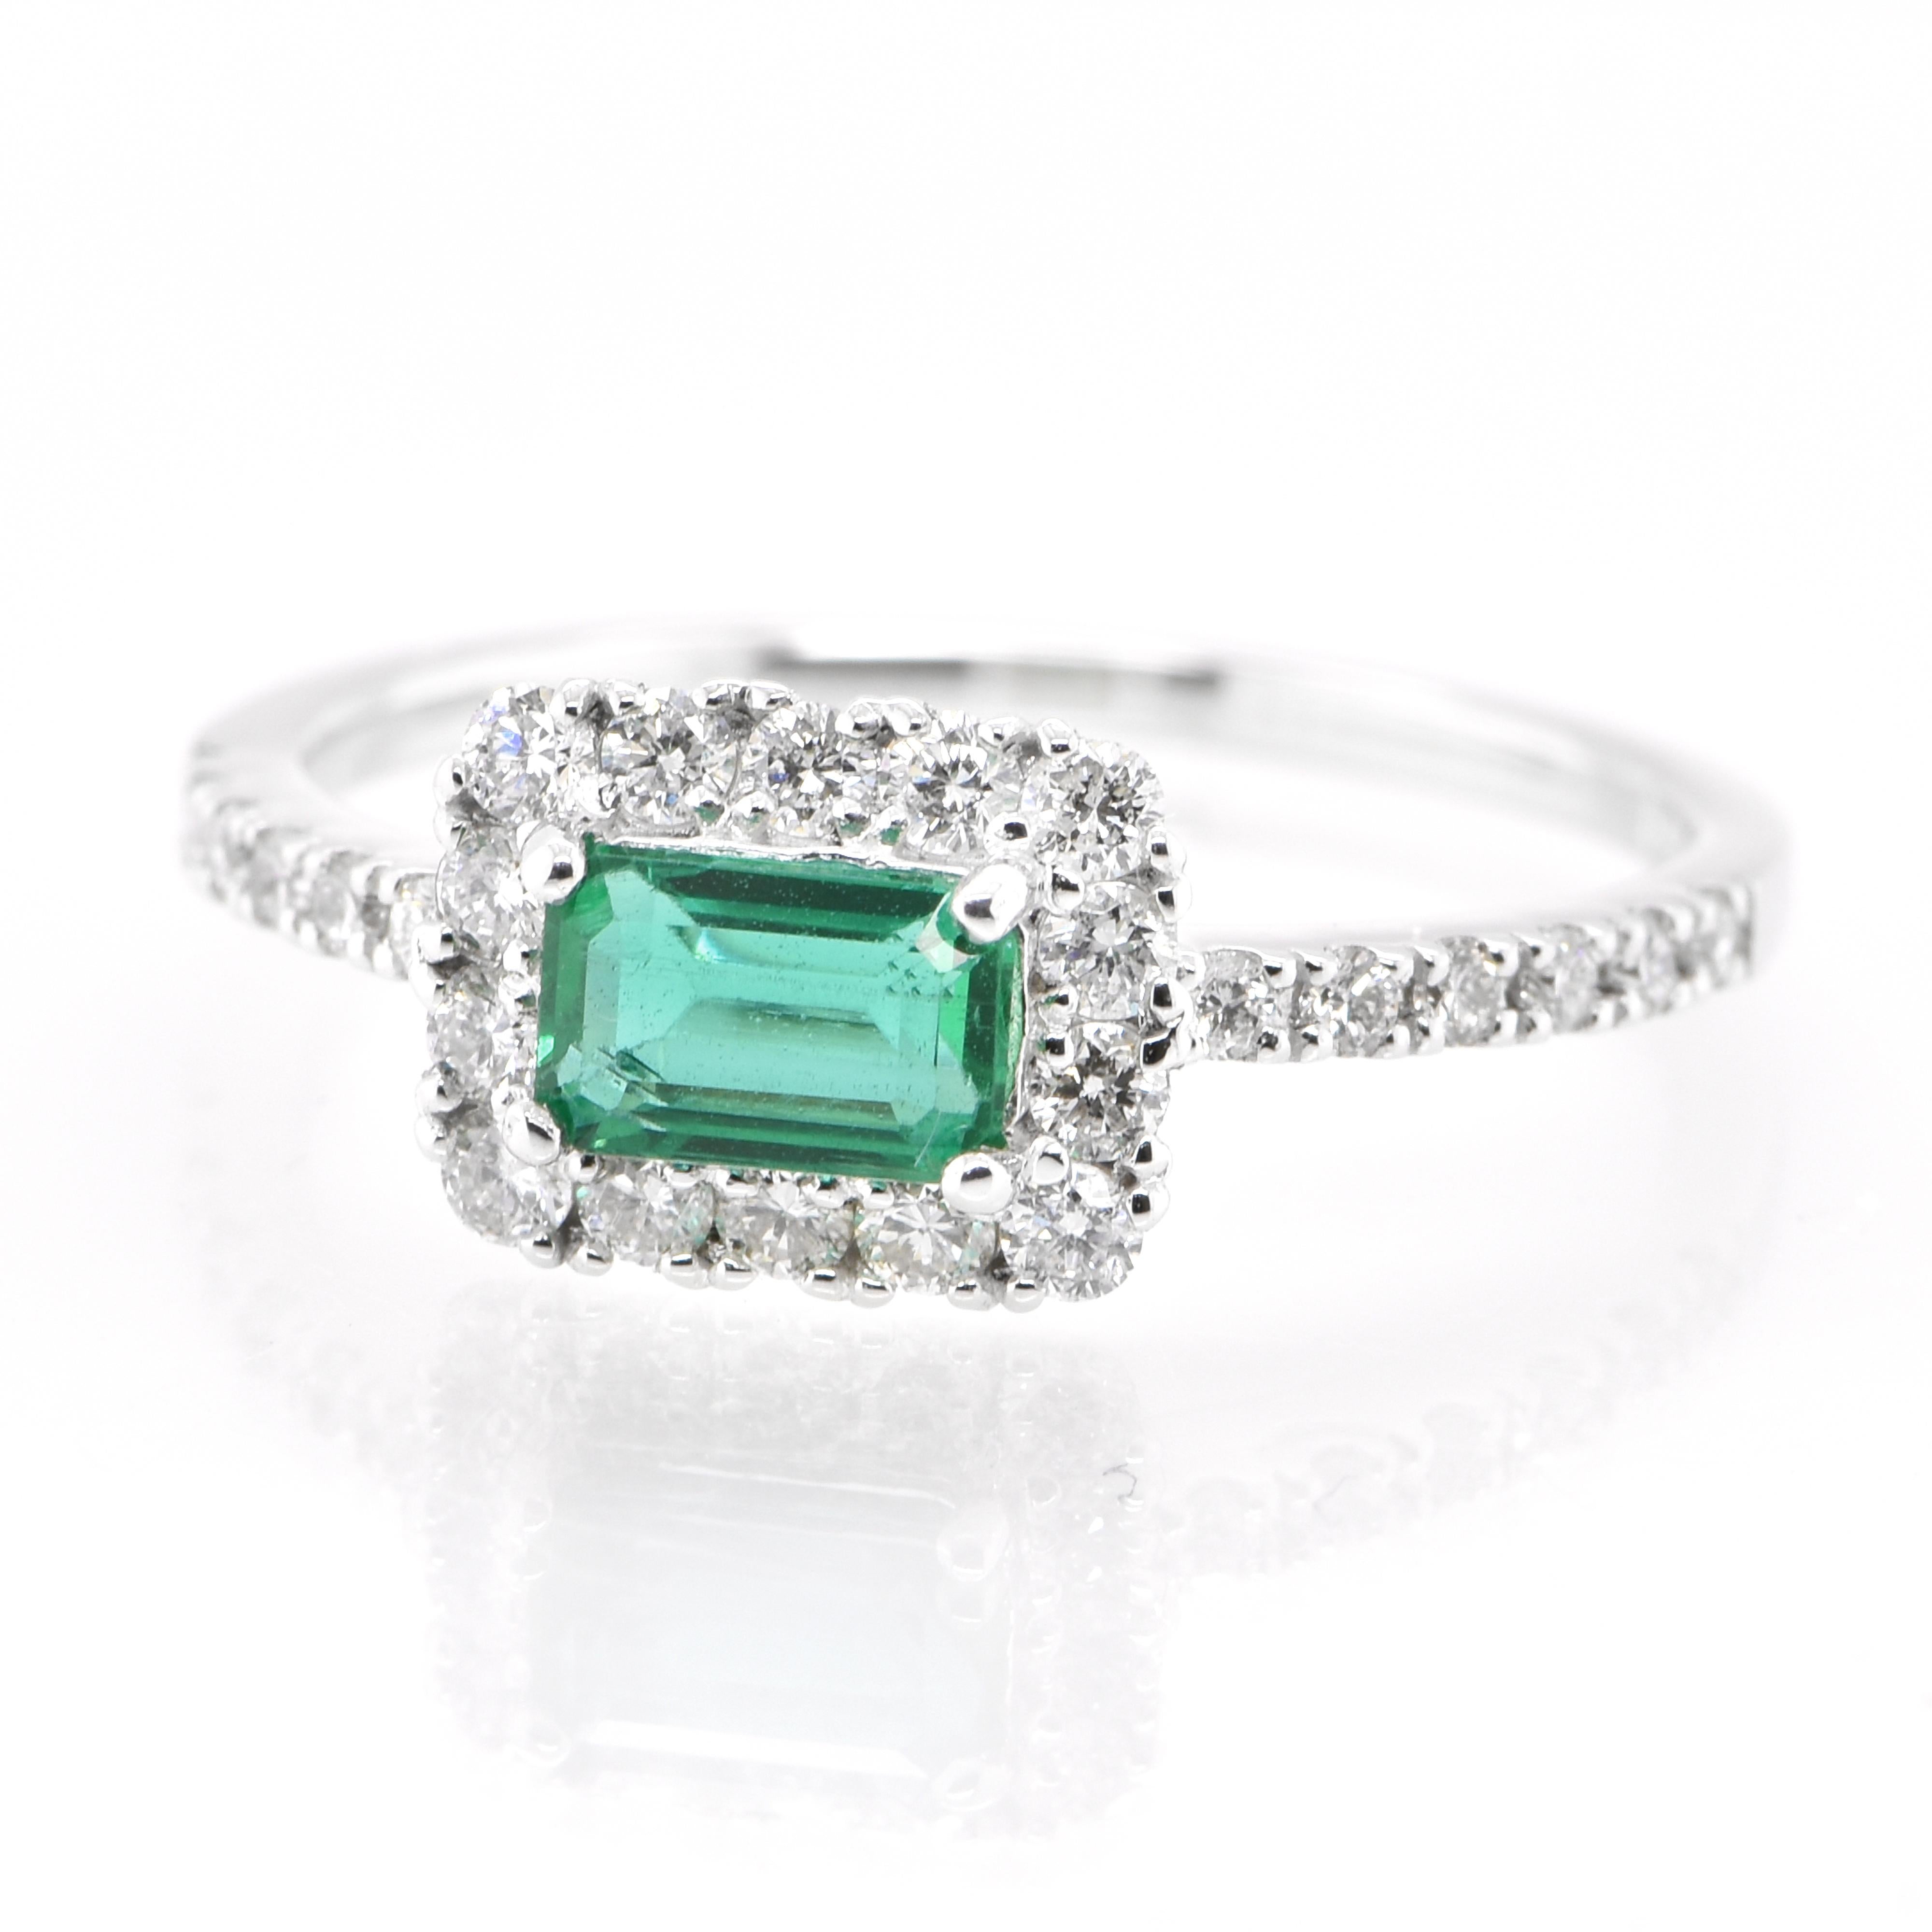 A stunning ring featuring a 0.52 Carat Natural Emerald and 0.37 Carats of Diamond Accents set in Platinum. People have admired emerald’s green for thousands of years. Emeralds have always been associated with the lushest landscapes and the richest